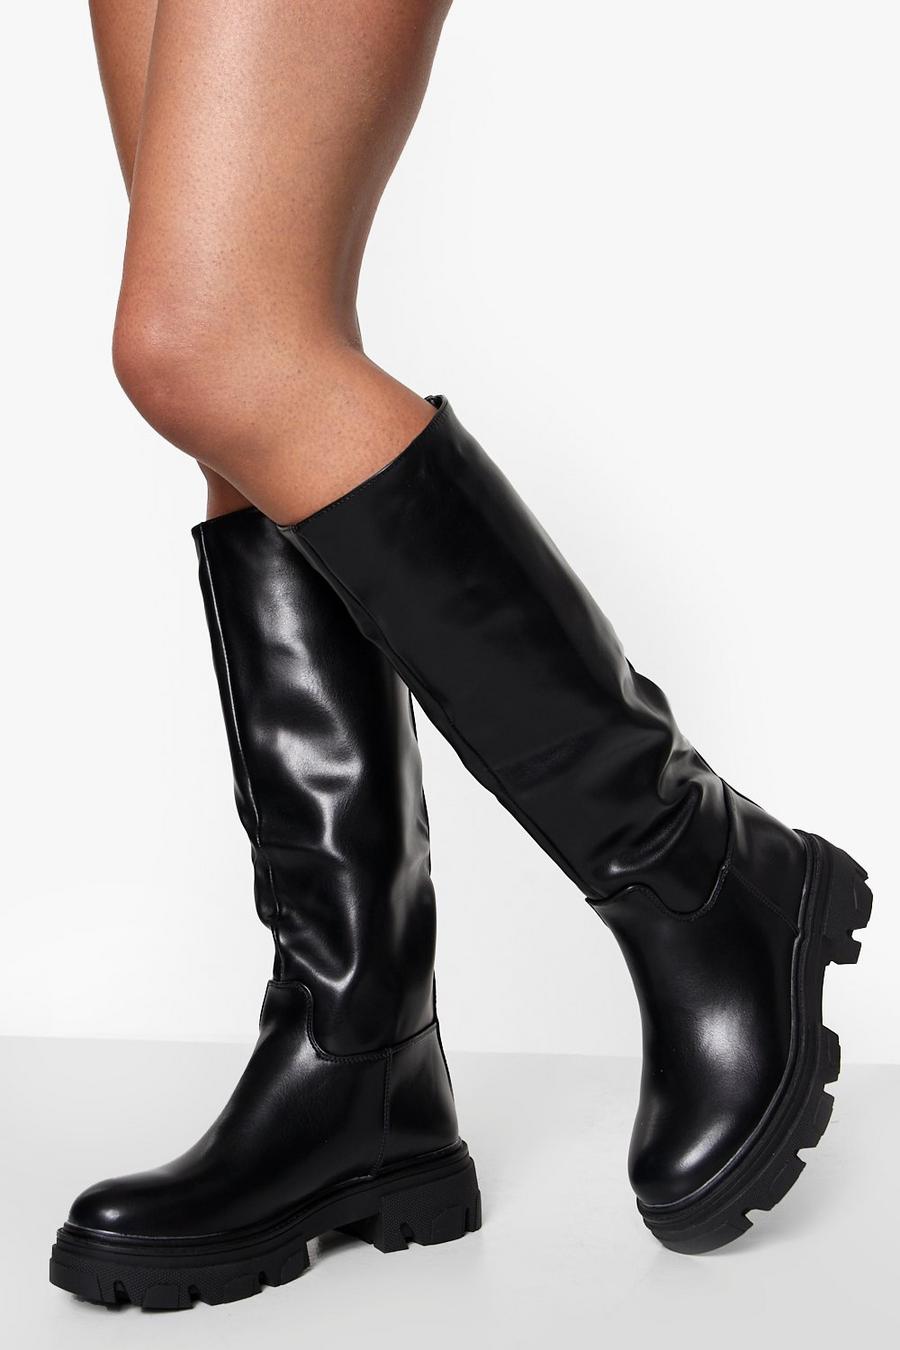 Black Cleated Sole Pull On Knee High Boots image number 1